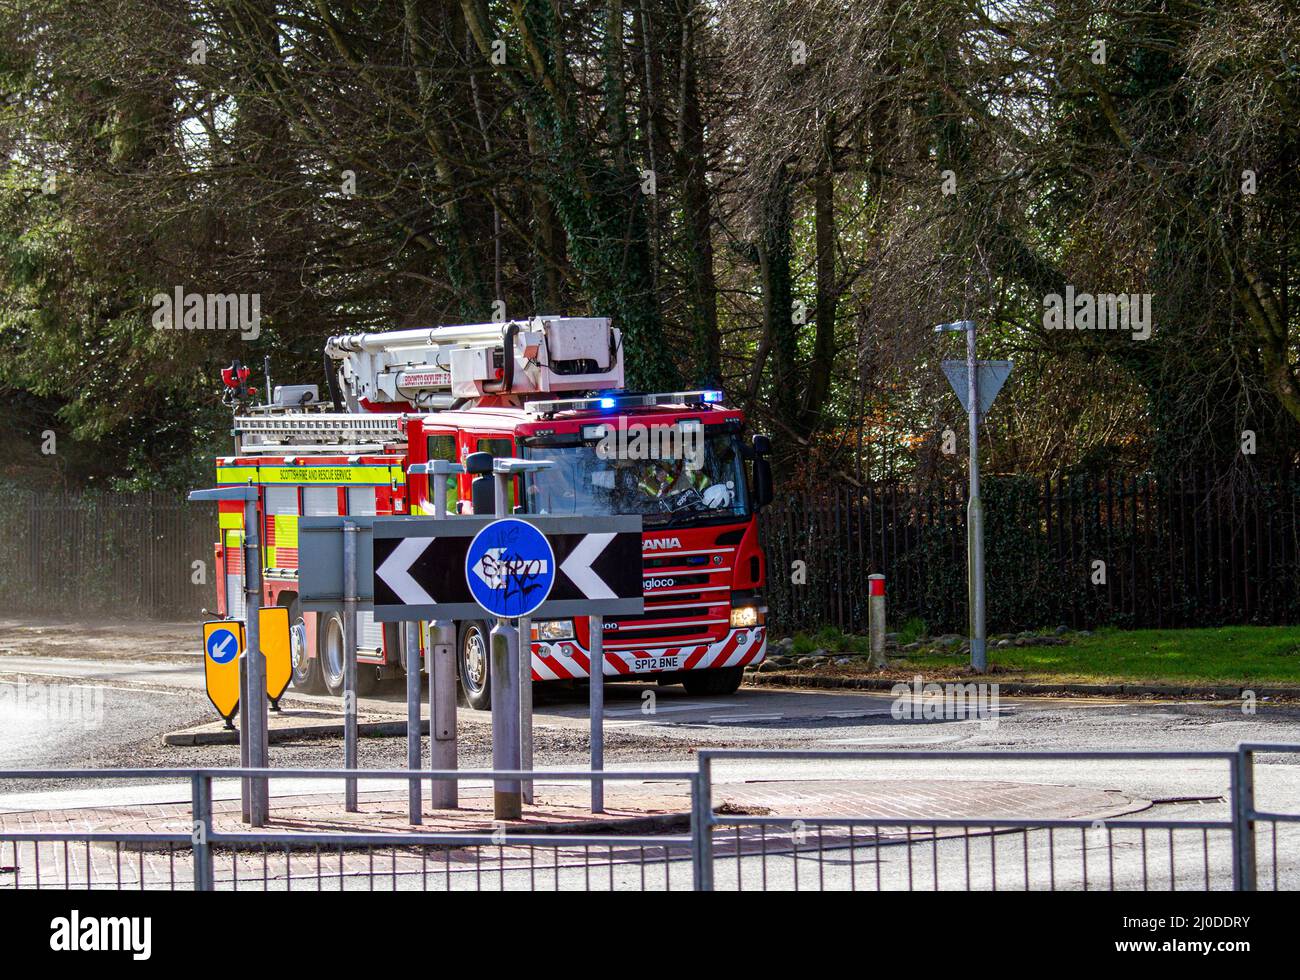 A Scottish Fire and Rescue Service fire engine responds at high speed to an emergency 999 call along MacAlpine Road in Ardler, Dundee, Scotland Stock Photo